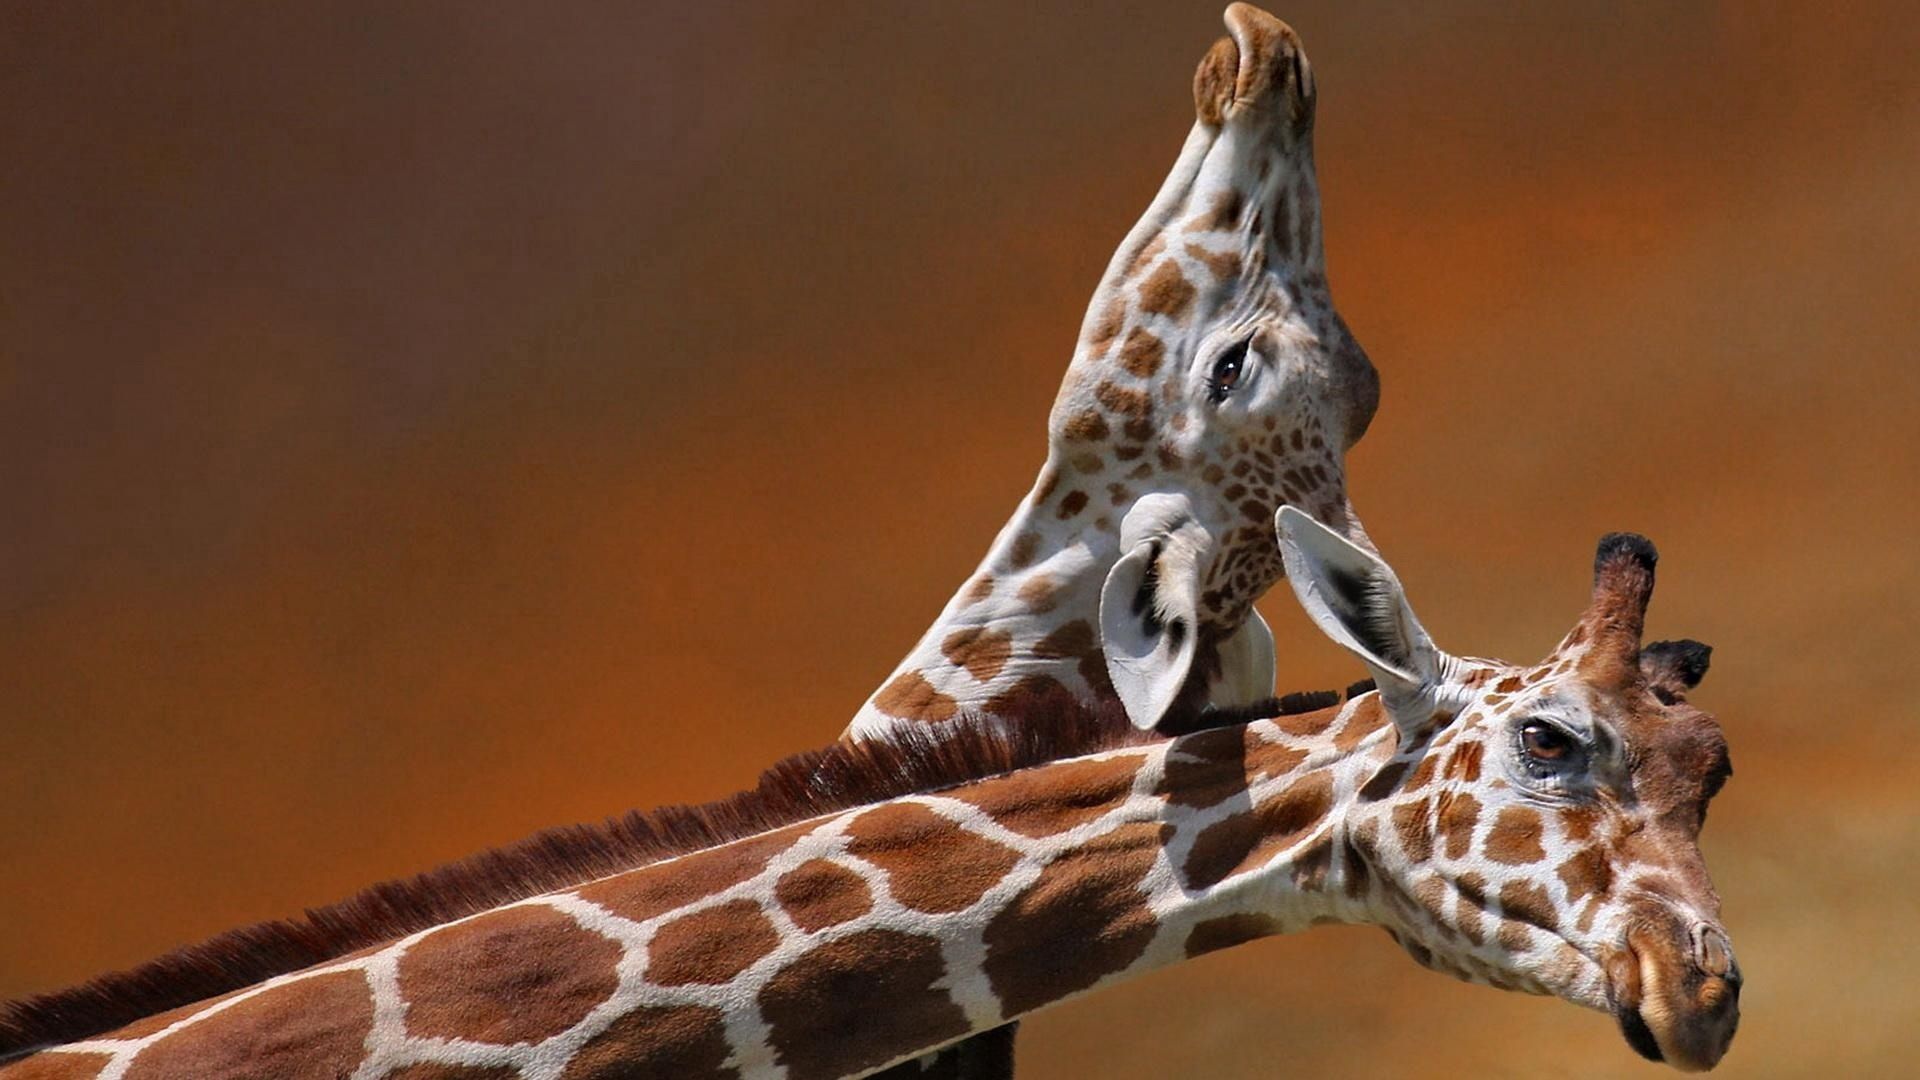 couple, giraffes, animals, pair, spotted, spotty, head, care